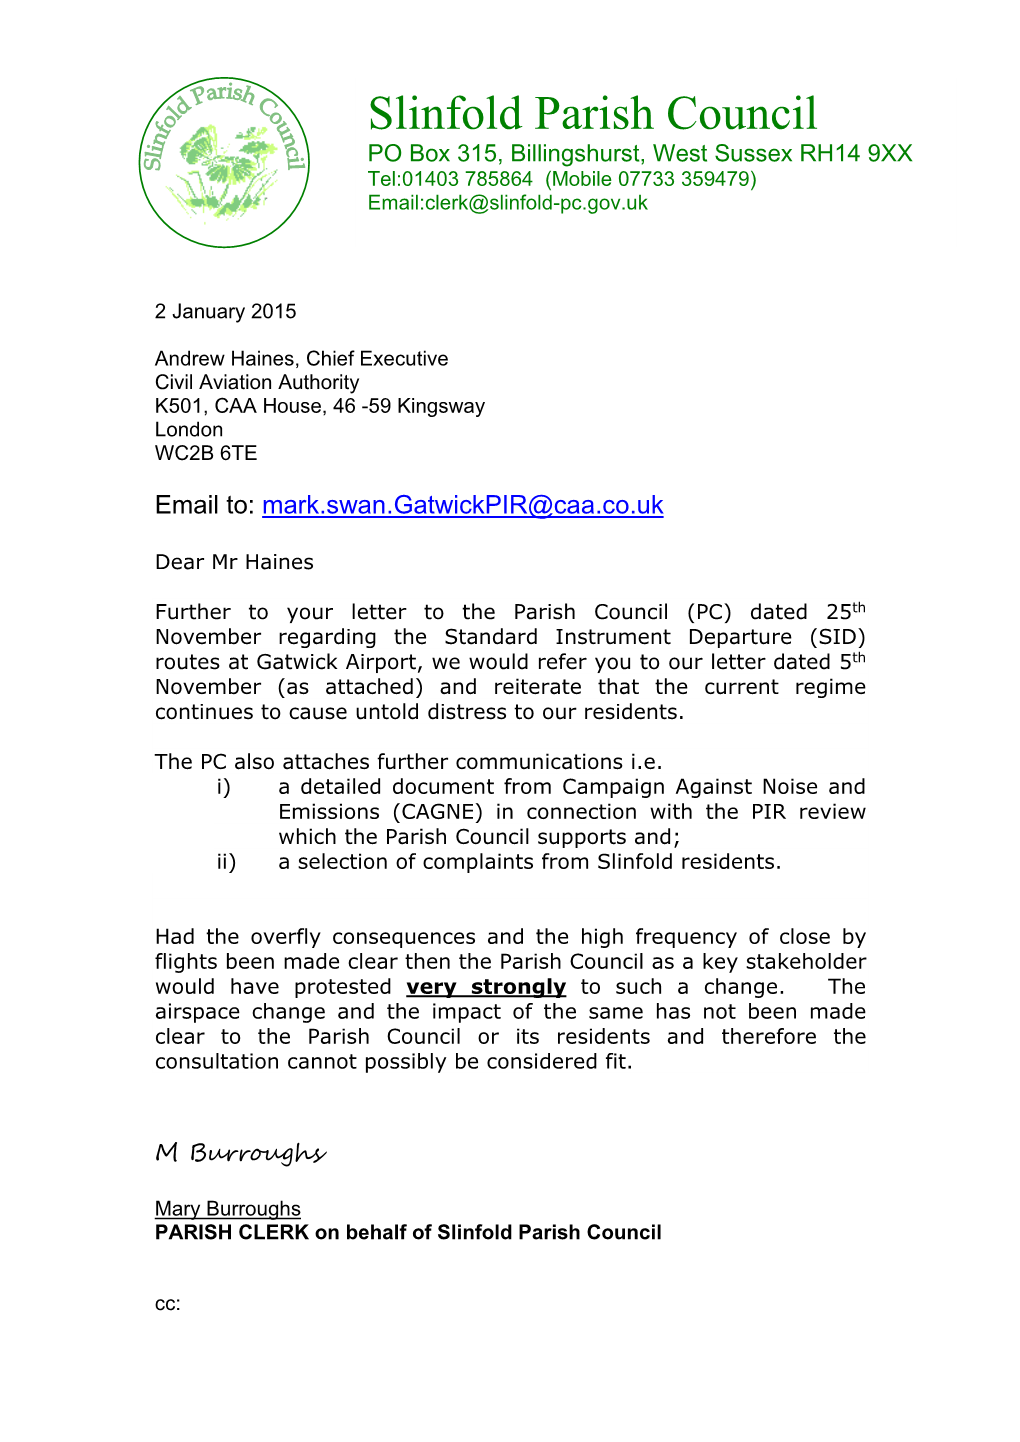 Letter Sent to Chief Executive of the CAA